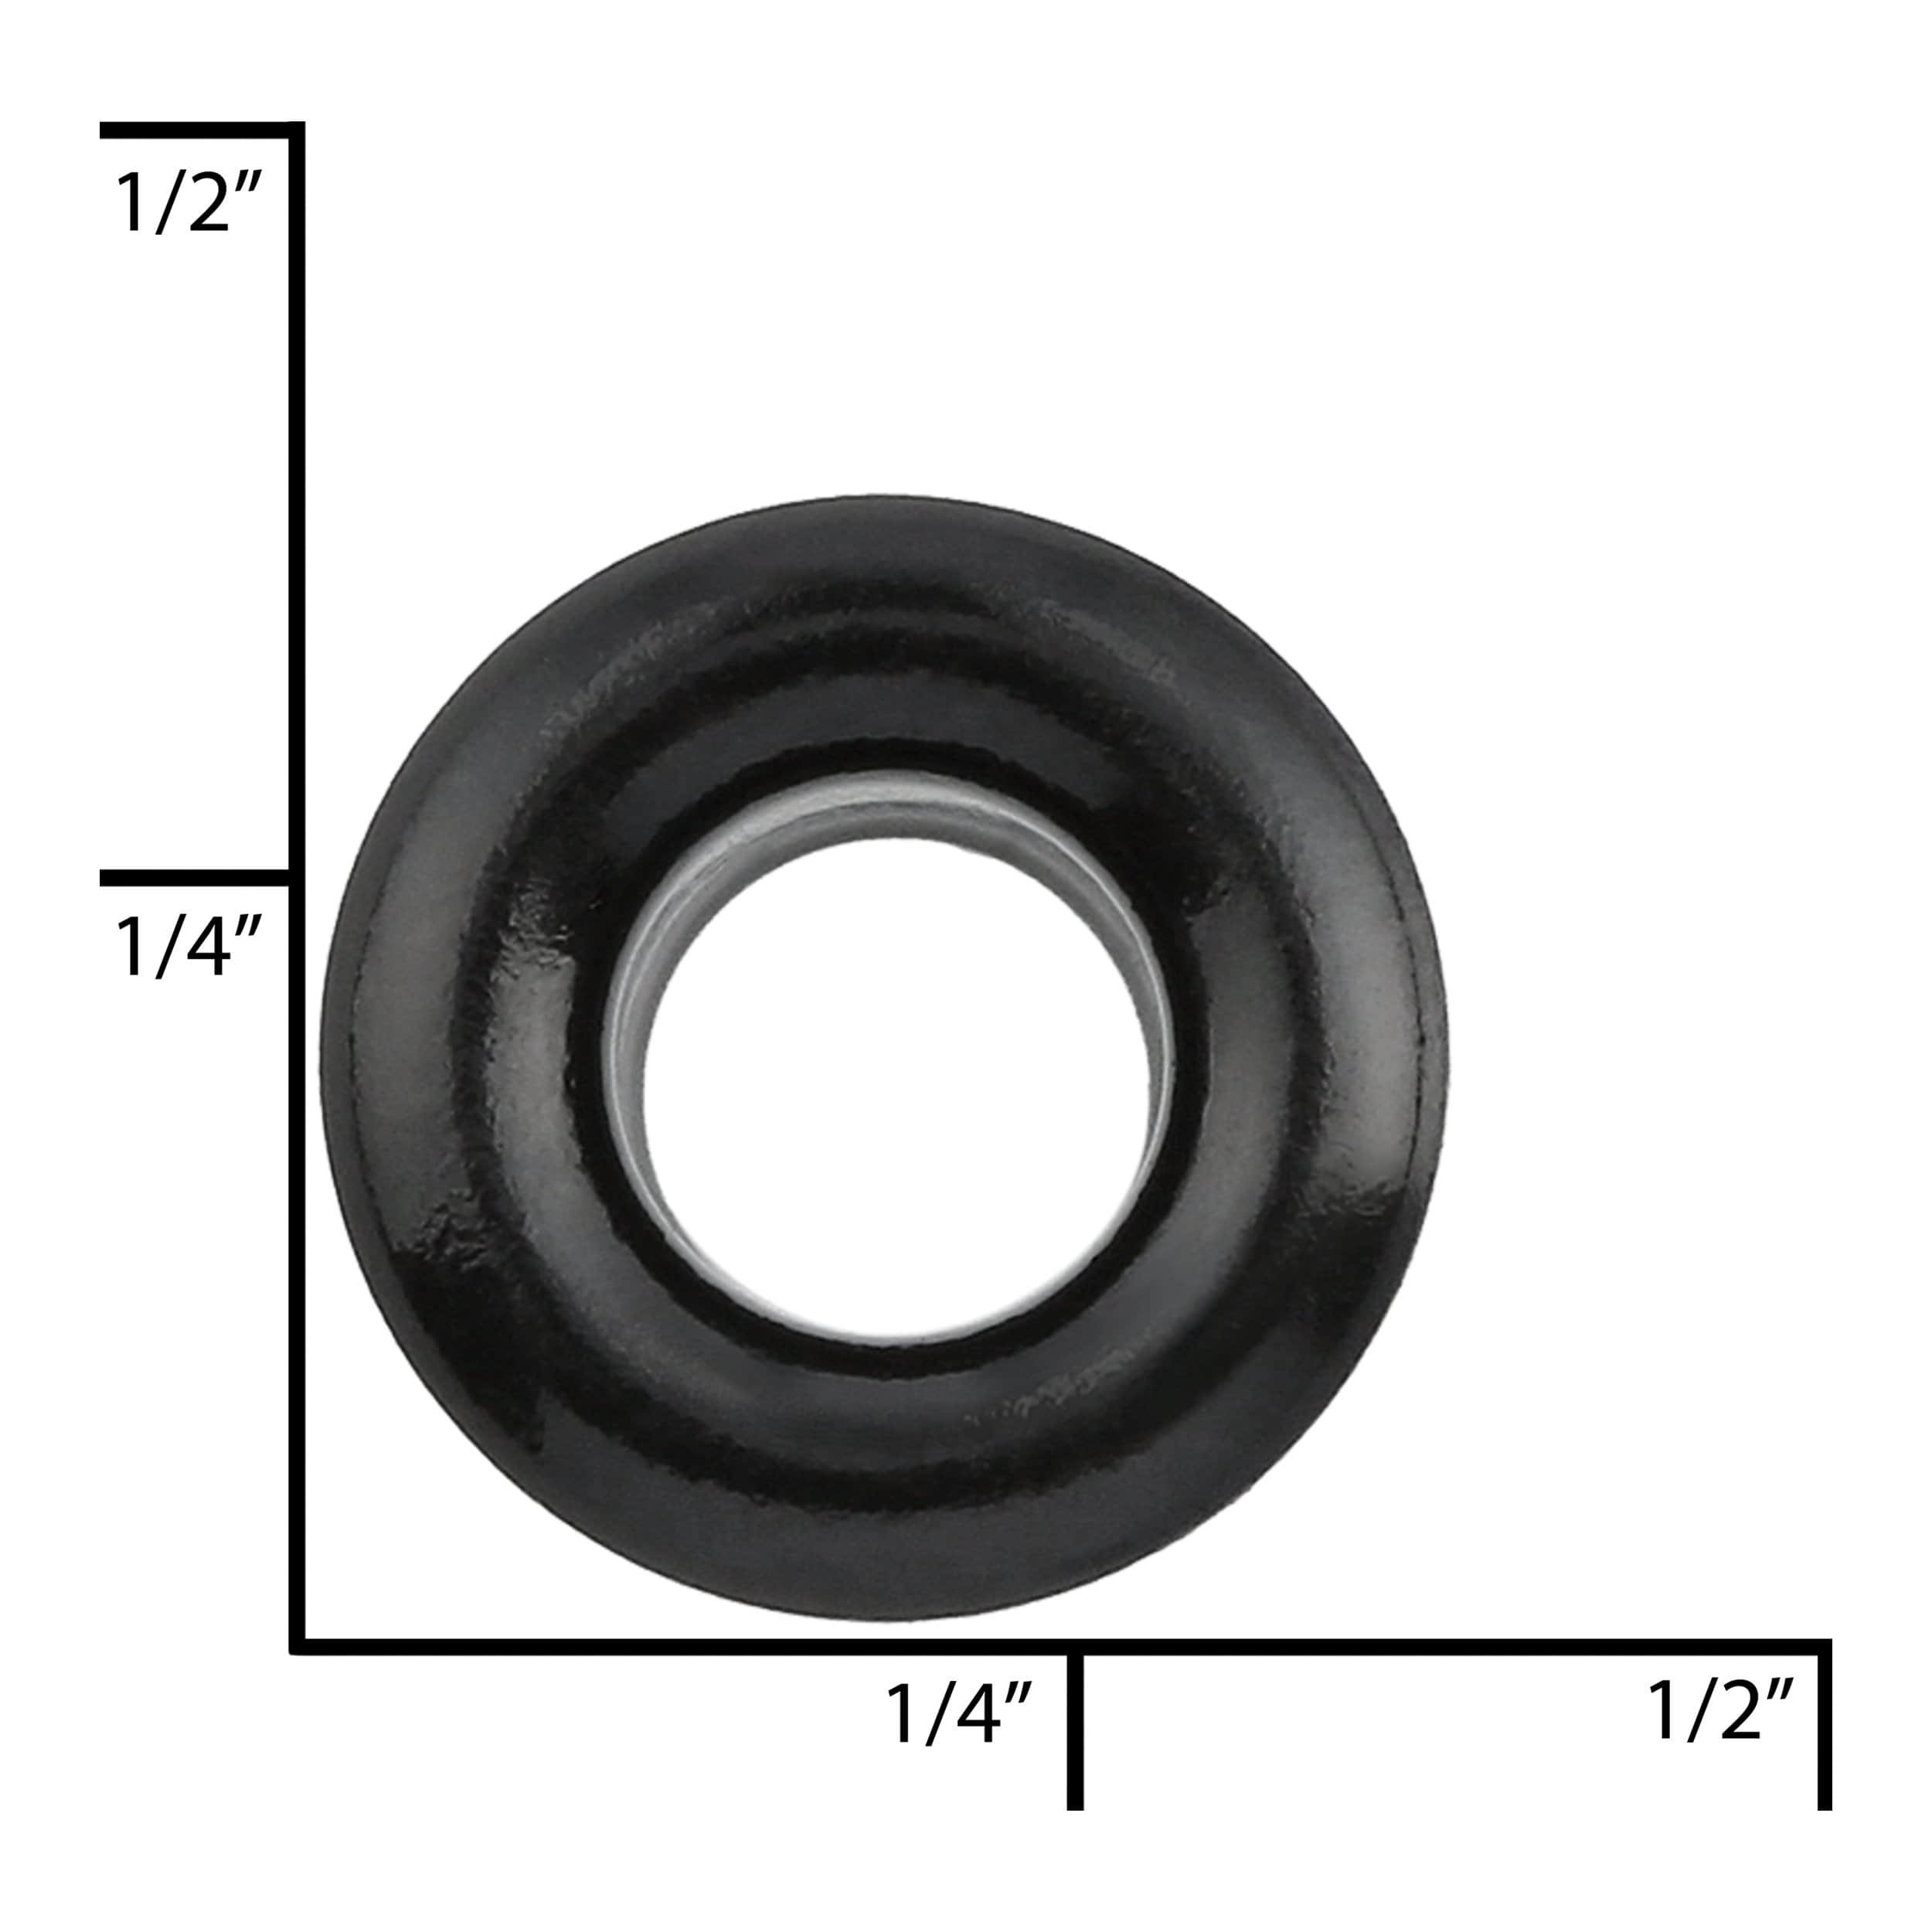 Ohio Travel Bag Fasteners 11/32" Black, Eyelet, Solid Brass - 12 pk, #A-346-BLK A-346-BLK